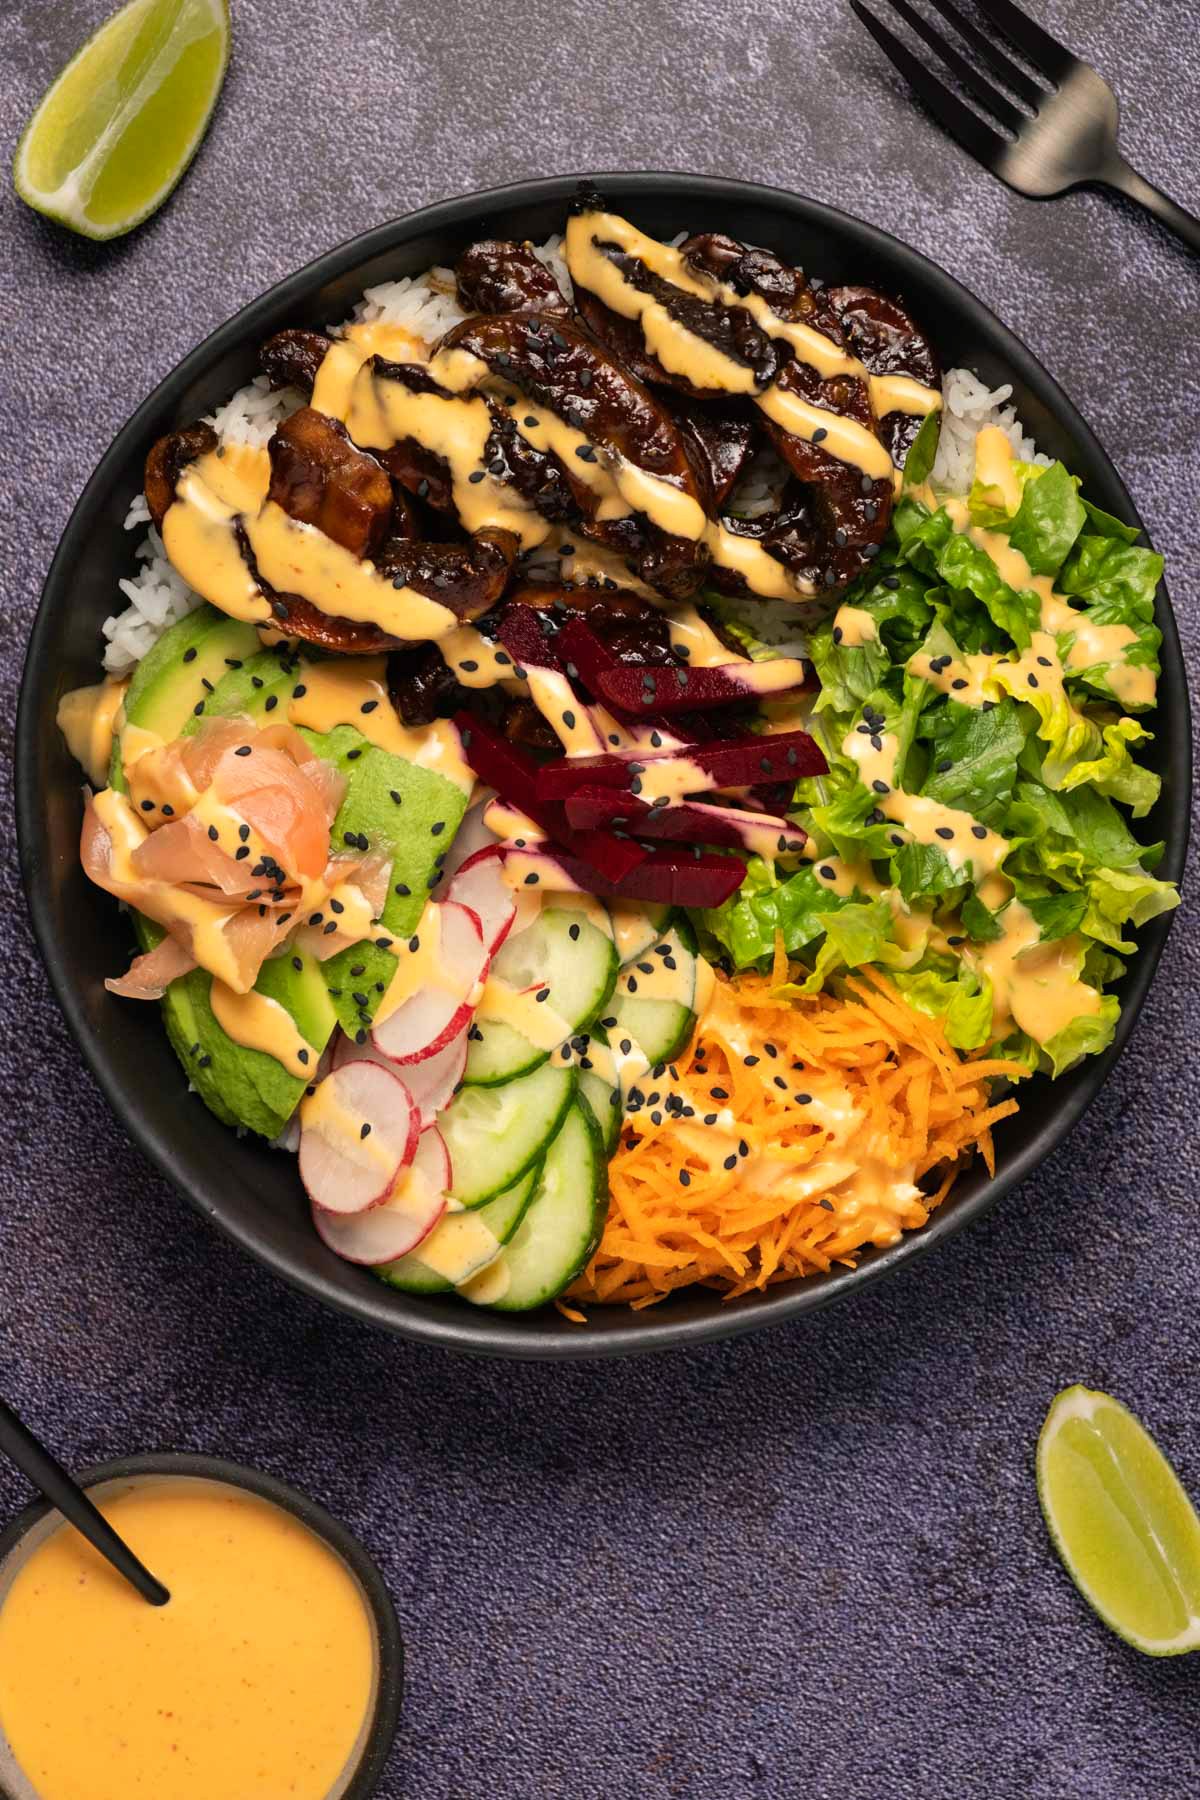 Black bowl filled with rice, salad and veggies and a drizzled dressing. 